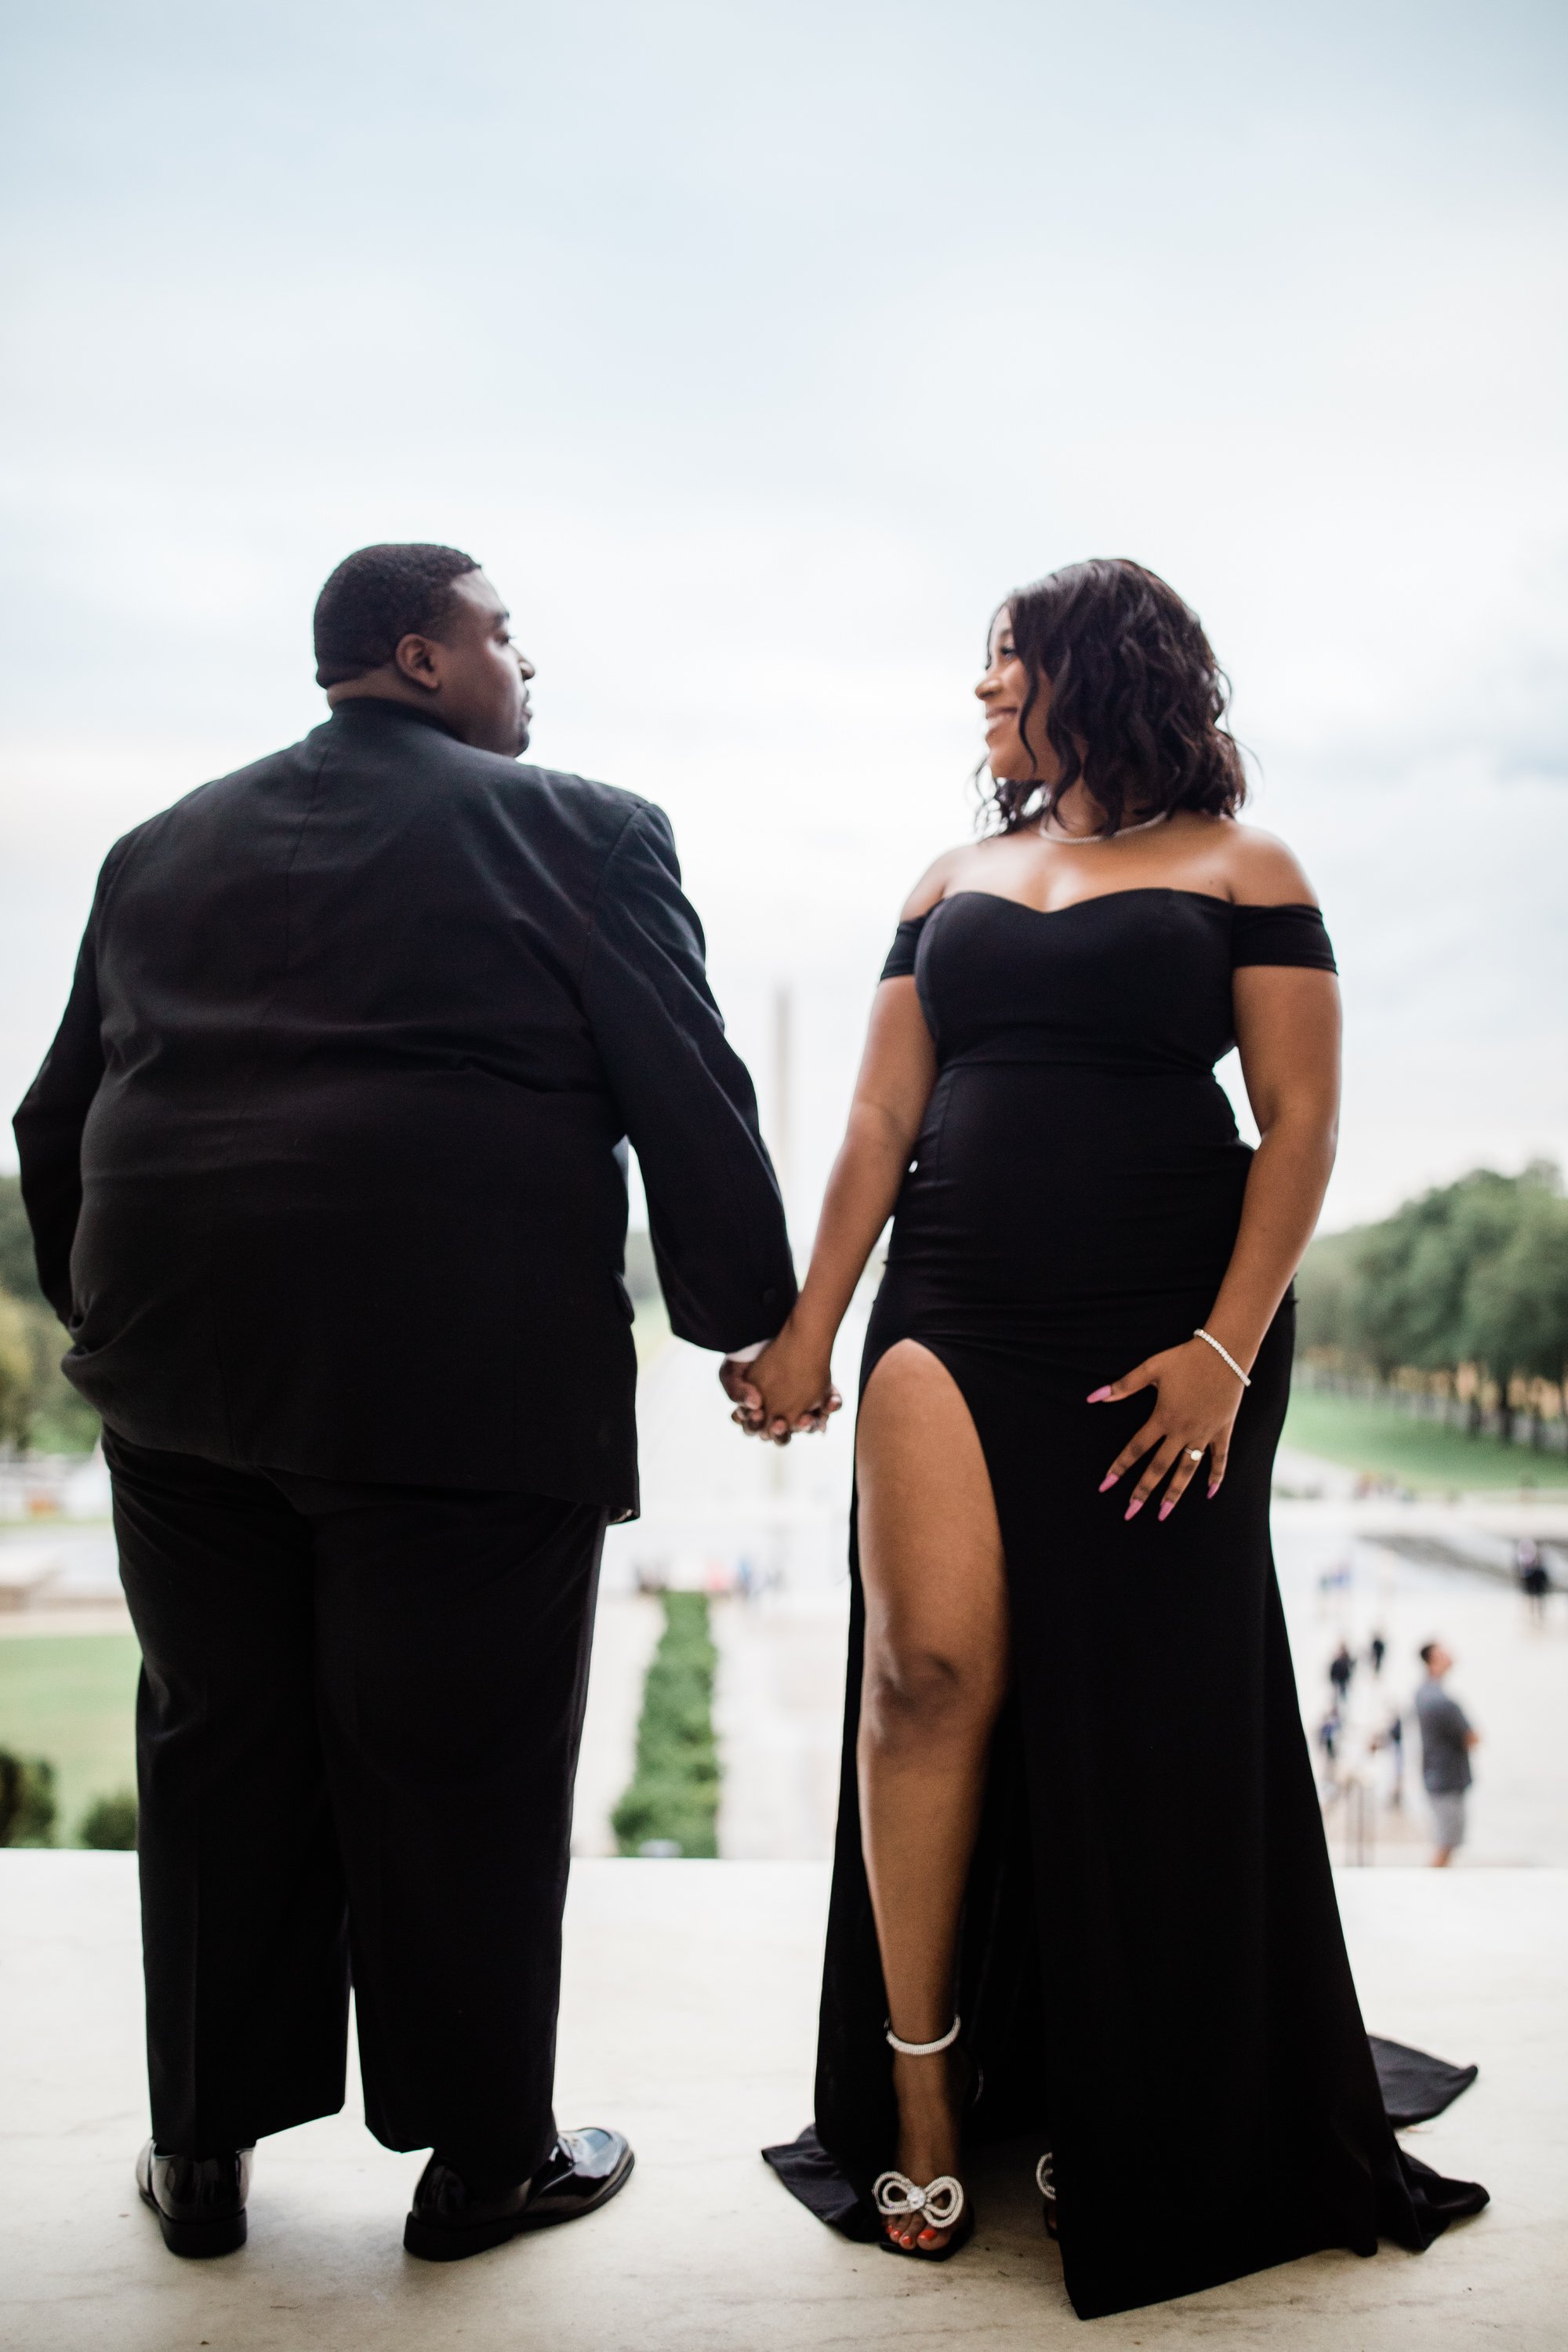 Best Black Wedding Photographers in Washington DC Megapixels Media Photography Engagement Photos at the Lincoln Memorial-24.jpg